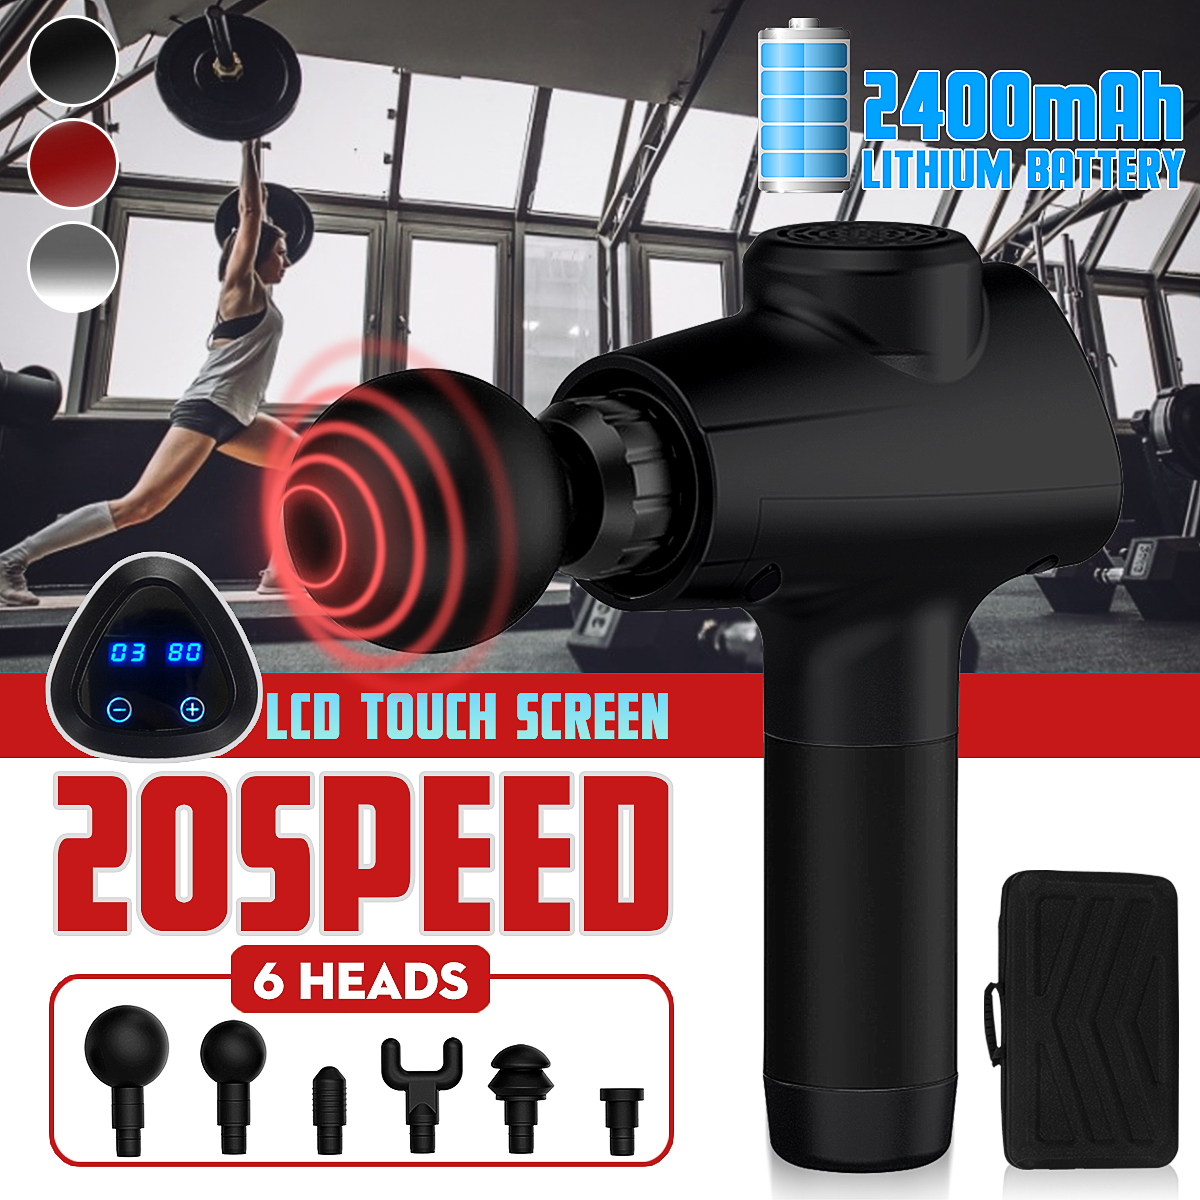 20-Speed-24V-2400mAh-Electric-Percussion-Massager-G-un-LCD-Muscle-Vibration-Relaxing-Therapy-Device-1574090-1